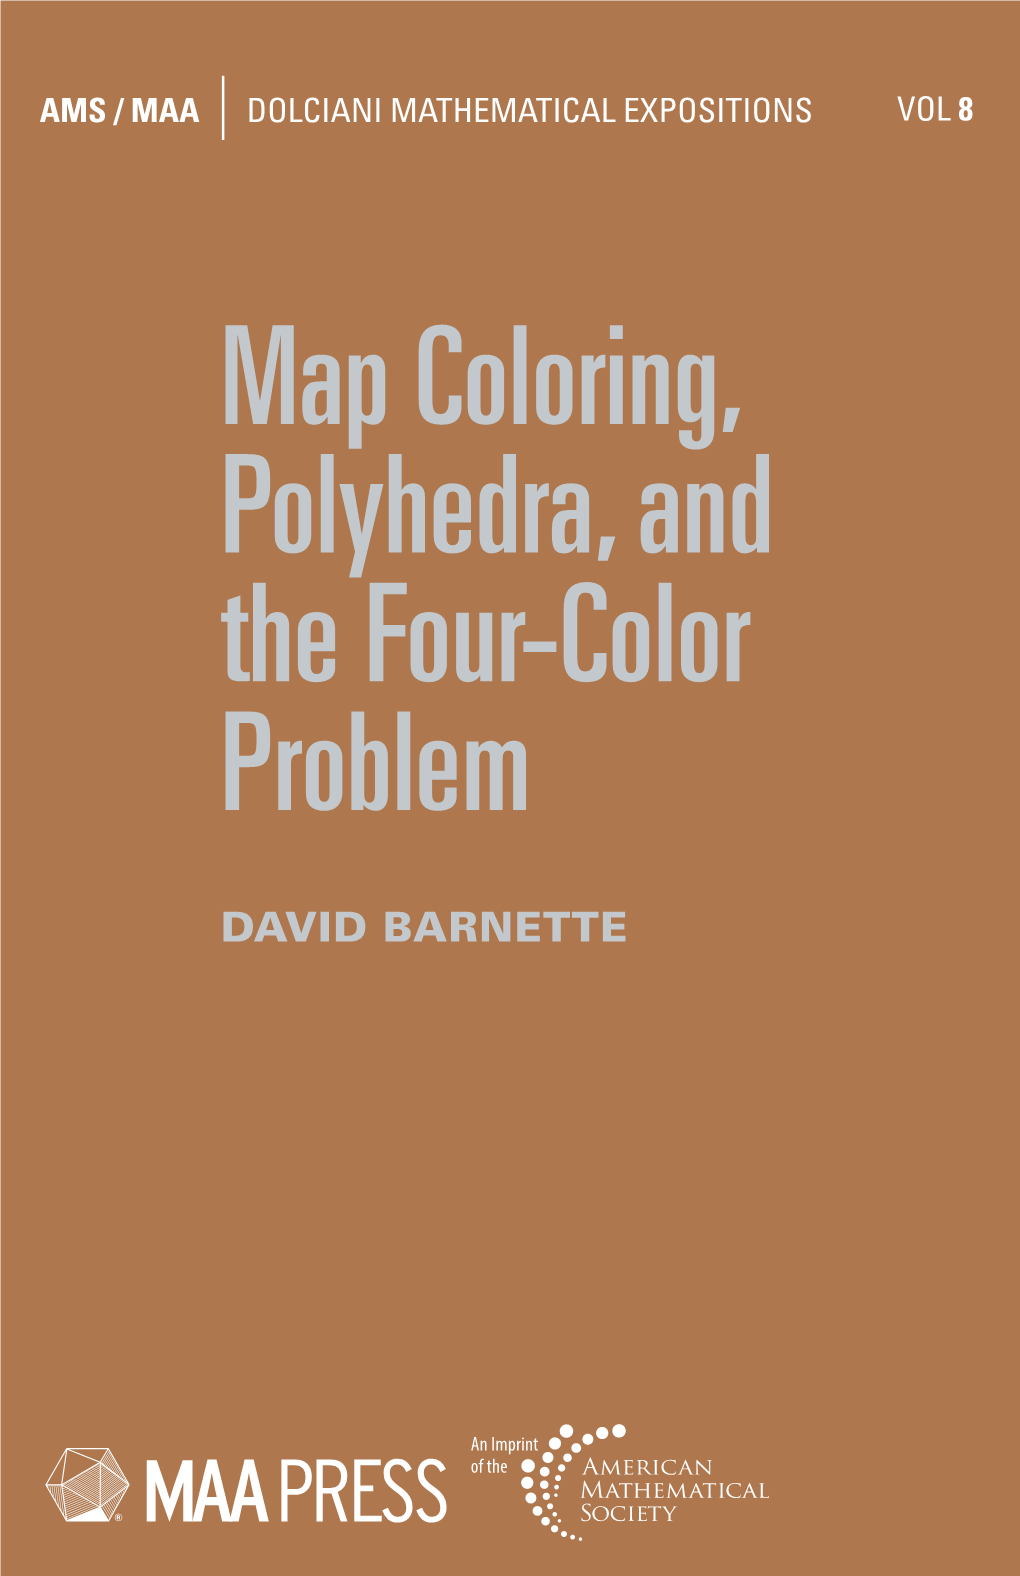 Map Coloring, Polyhedra, and the Four-Color Problem